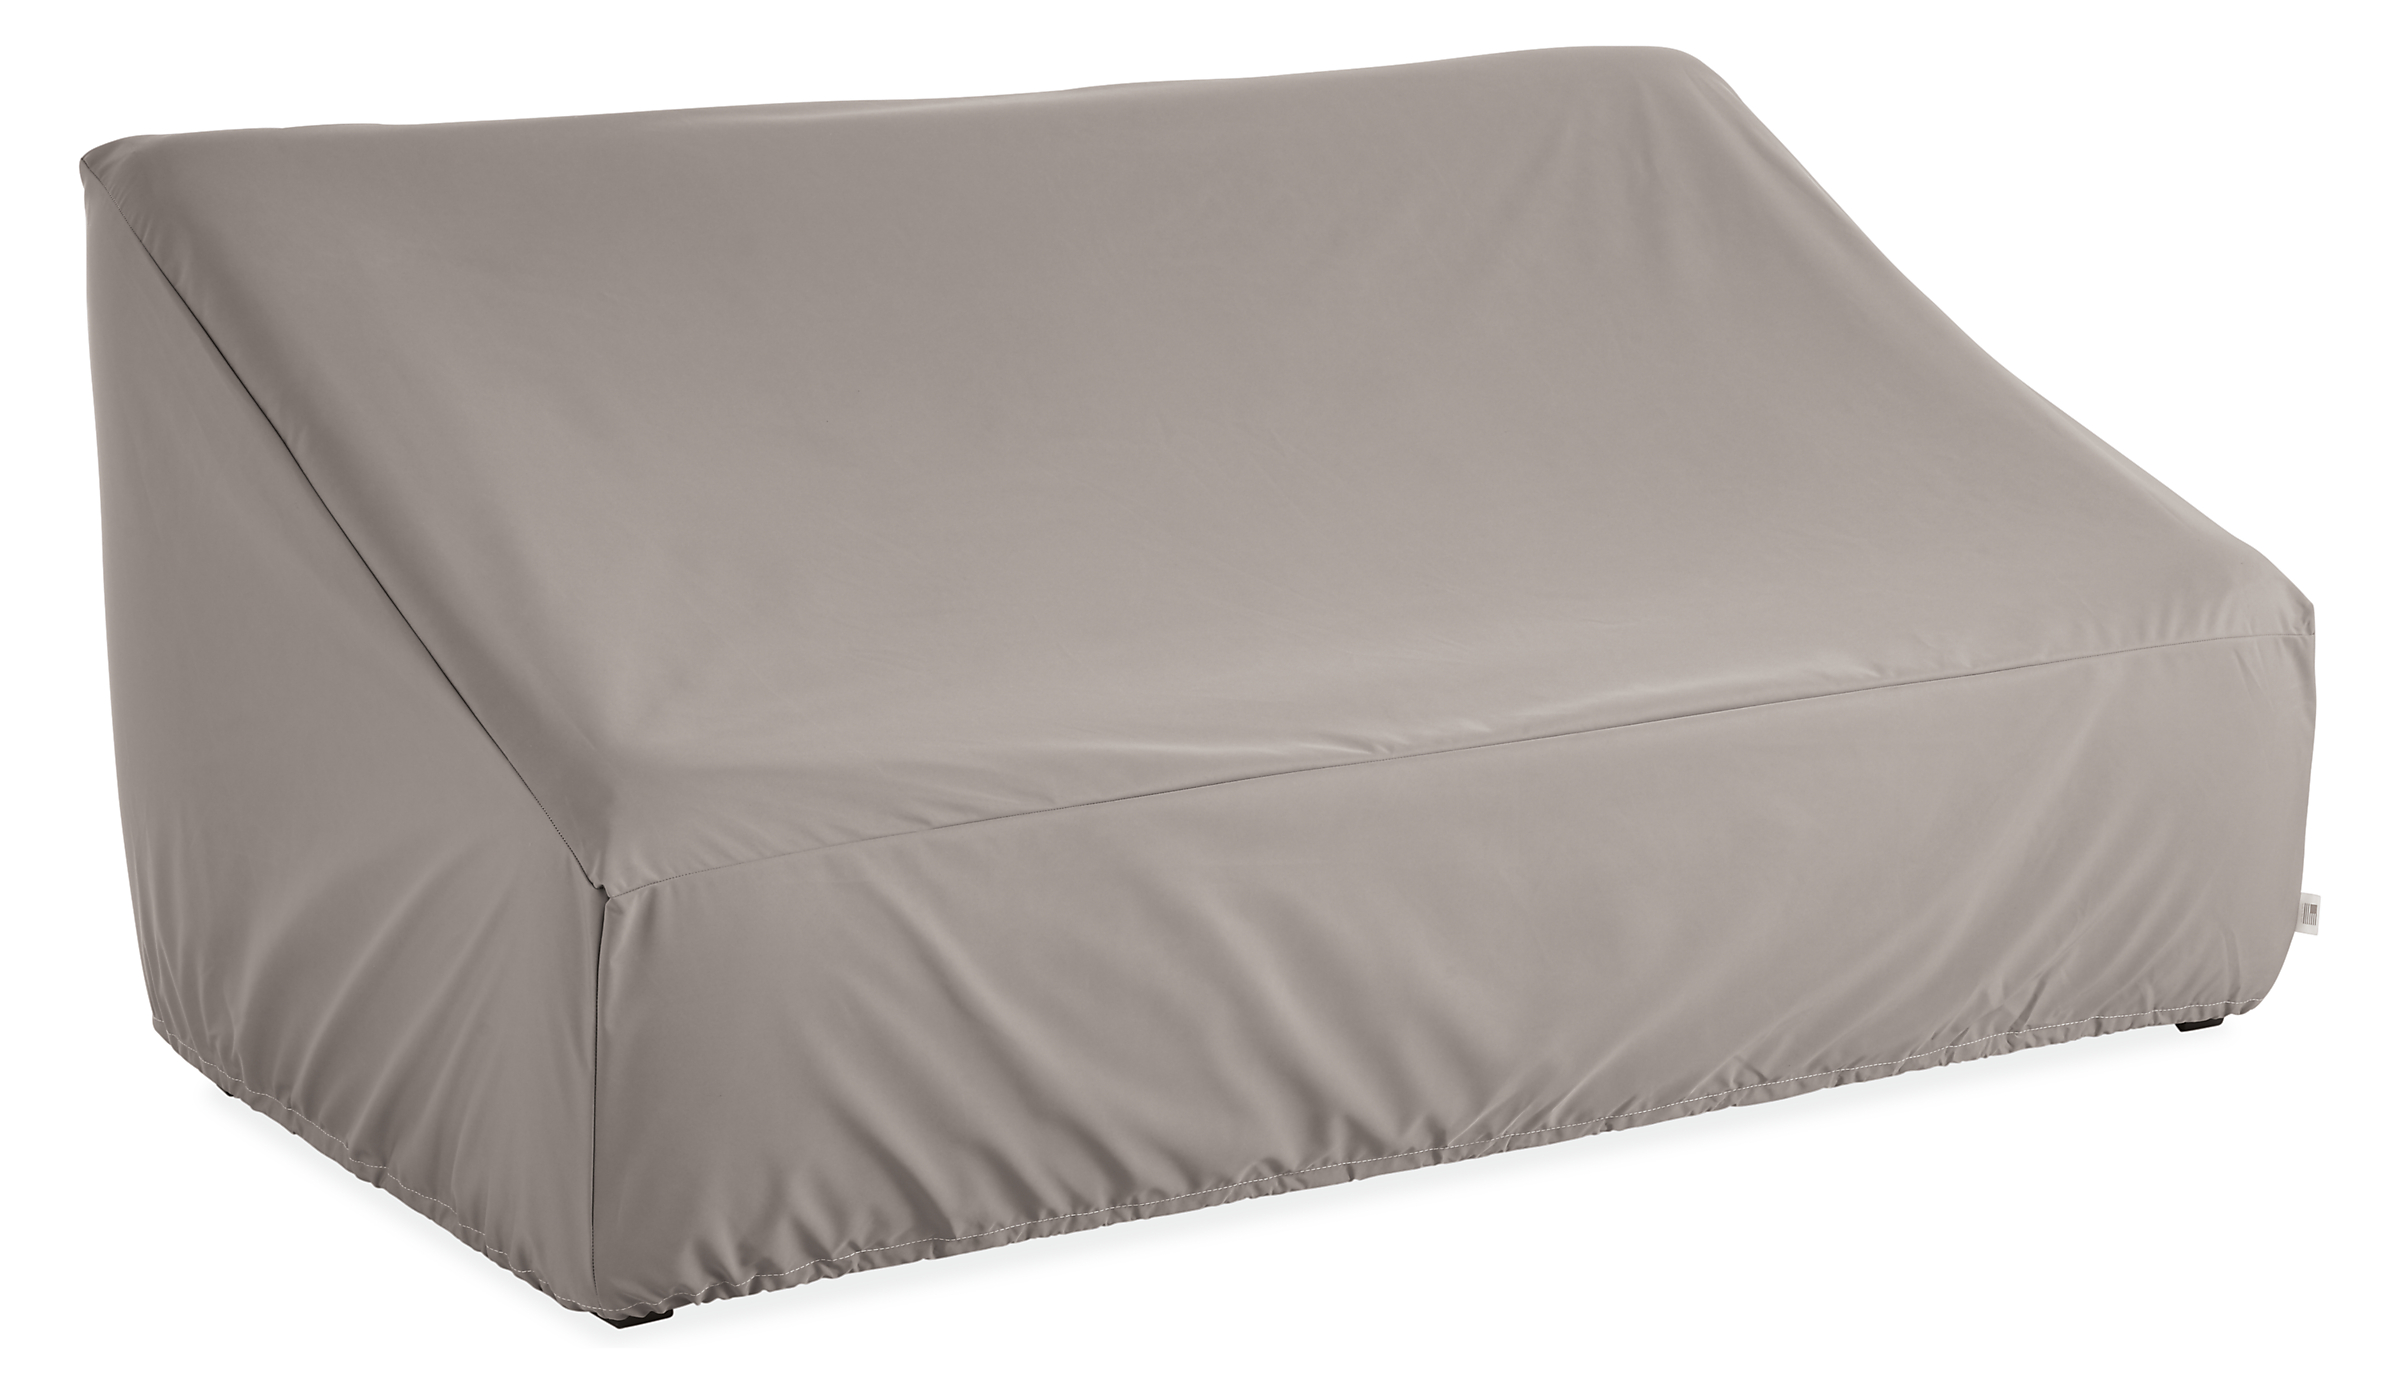 Outdoor Cover for Sofa 79w 39d 26h with Drawstring